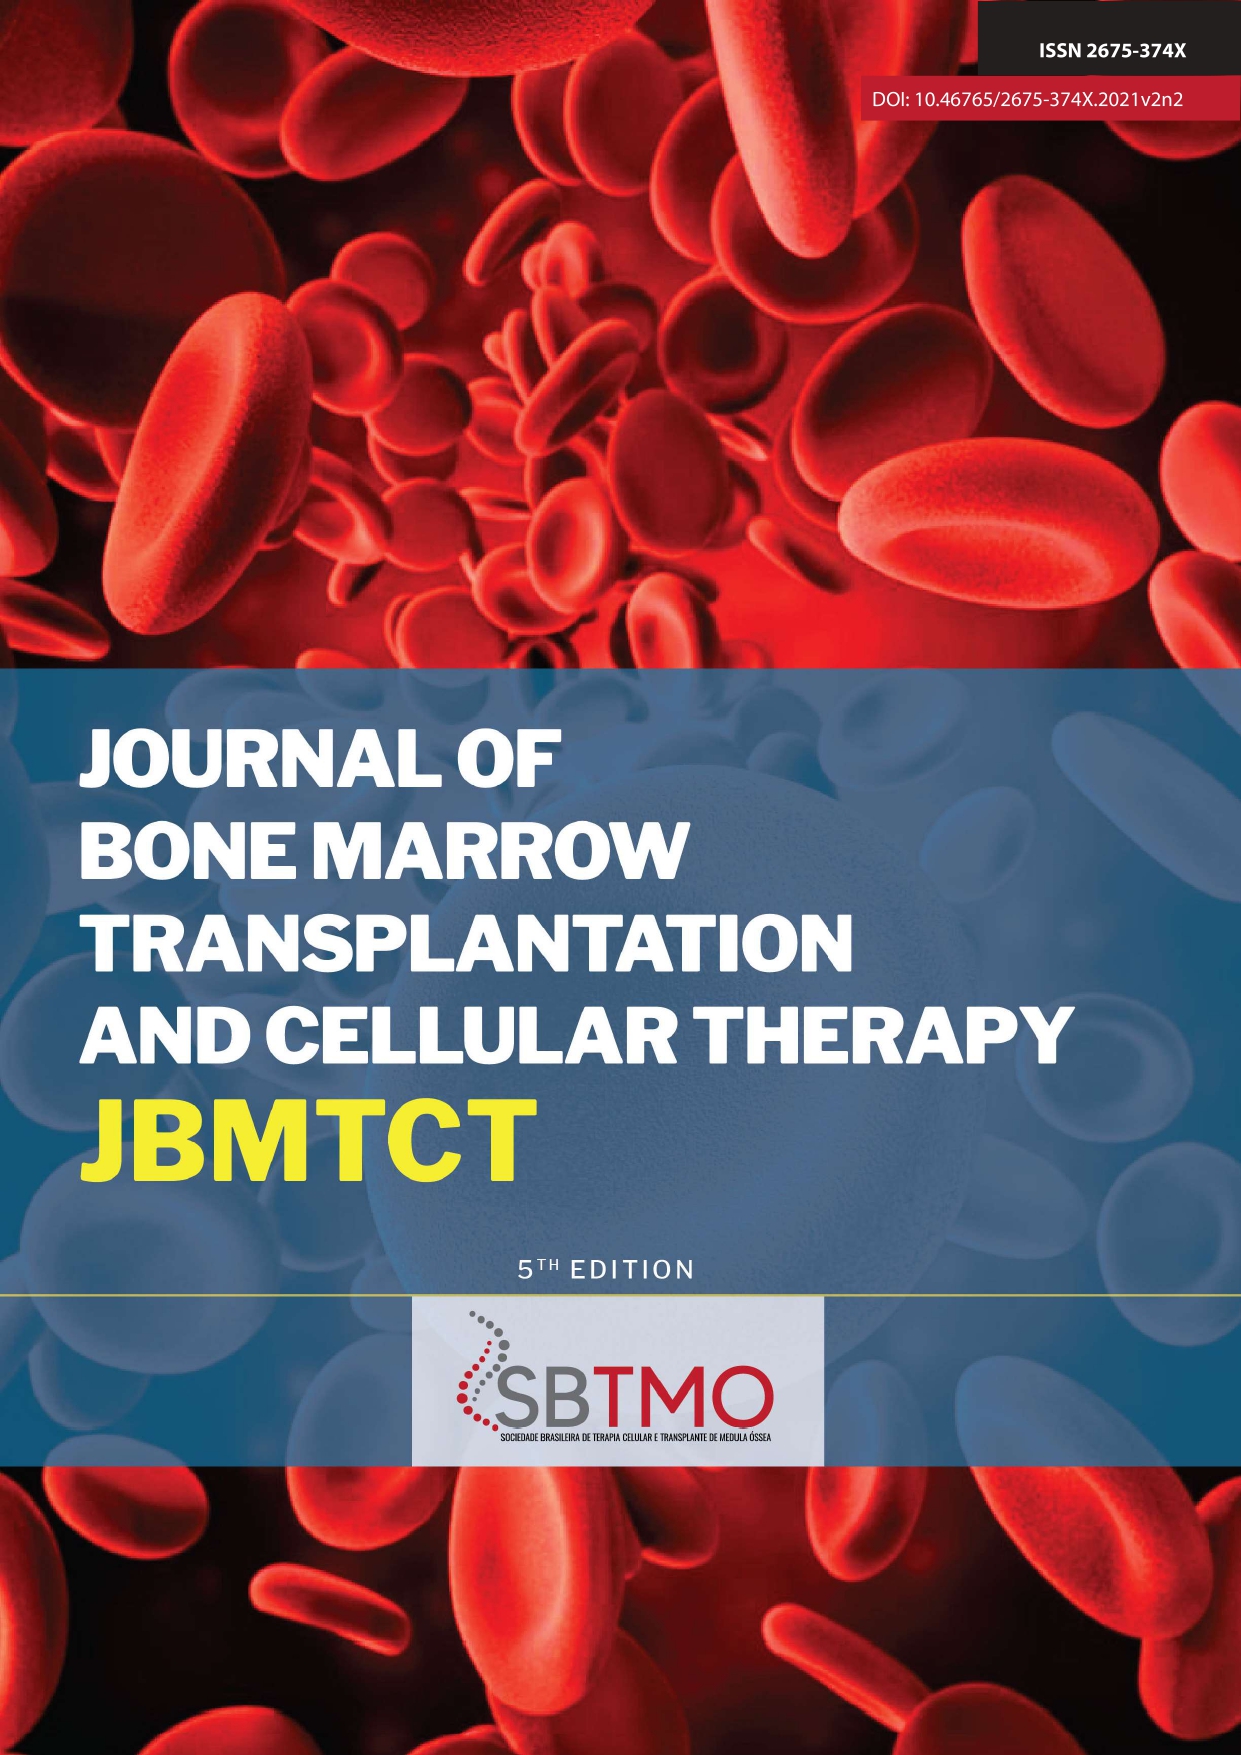 					View Vol. 2 No. 2 (2021): Journal of Bone Marrow Transplantation and Cellular Therapy
				